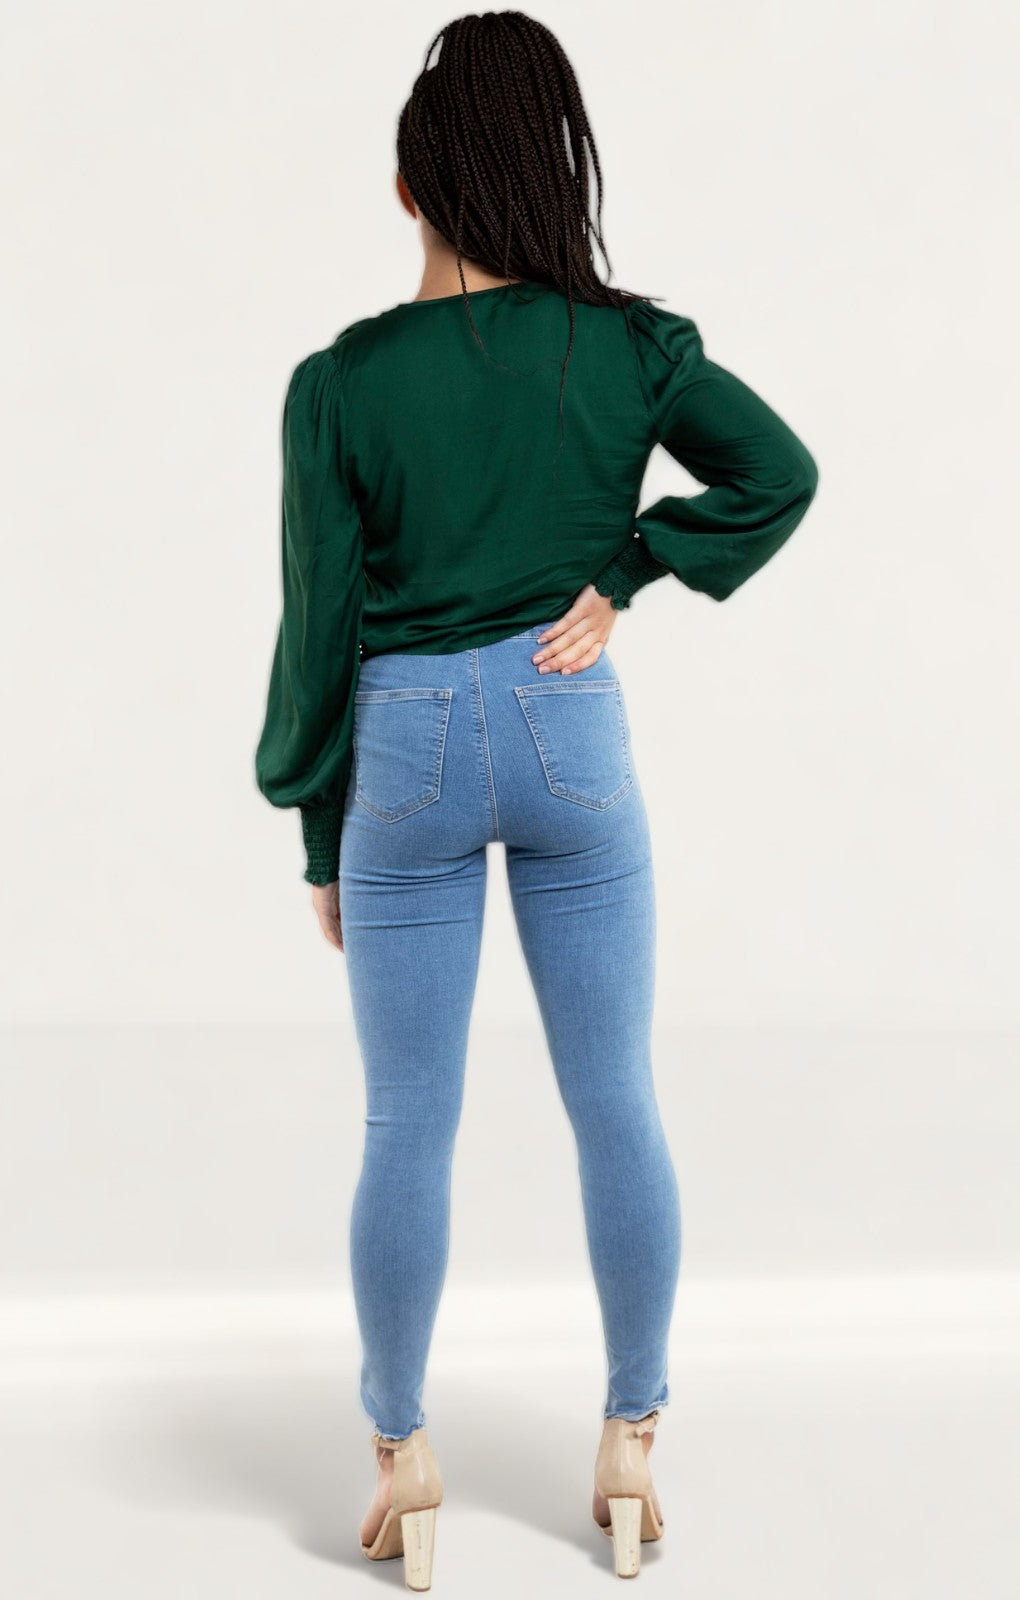 Zara Green Satin Blouse With Knot Detail